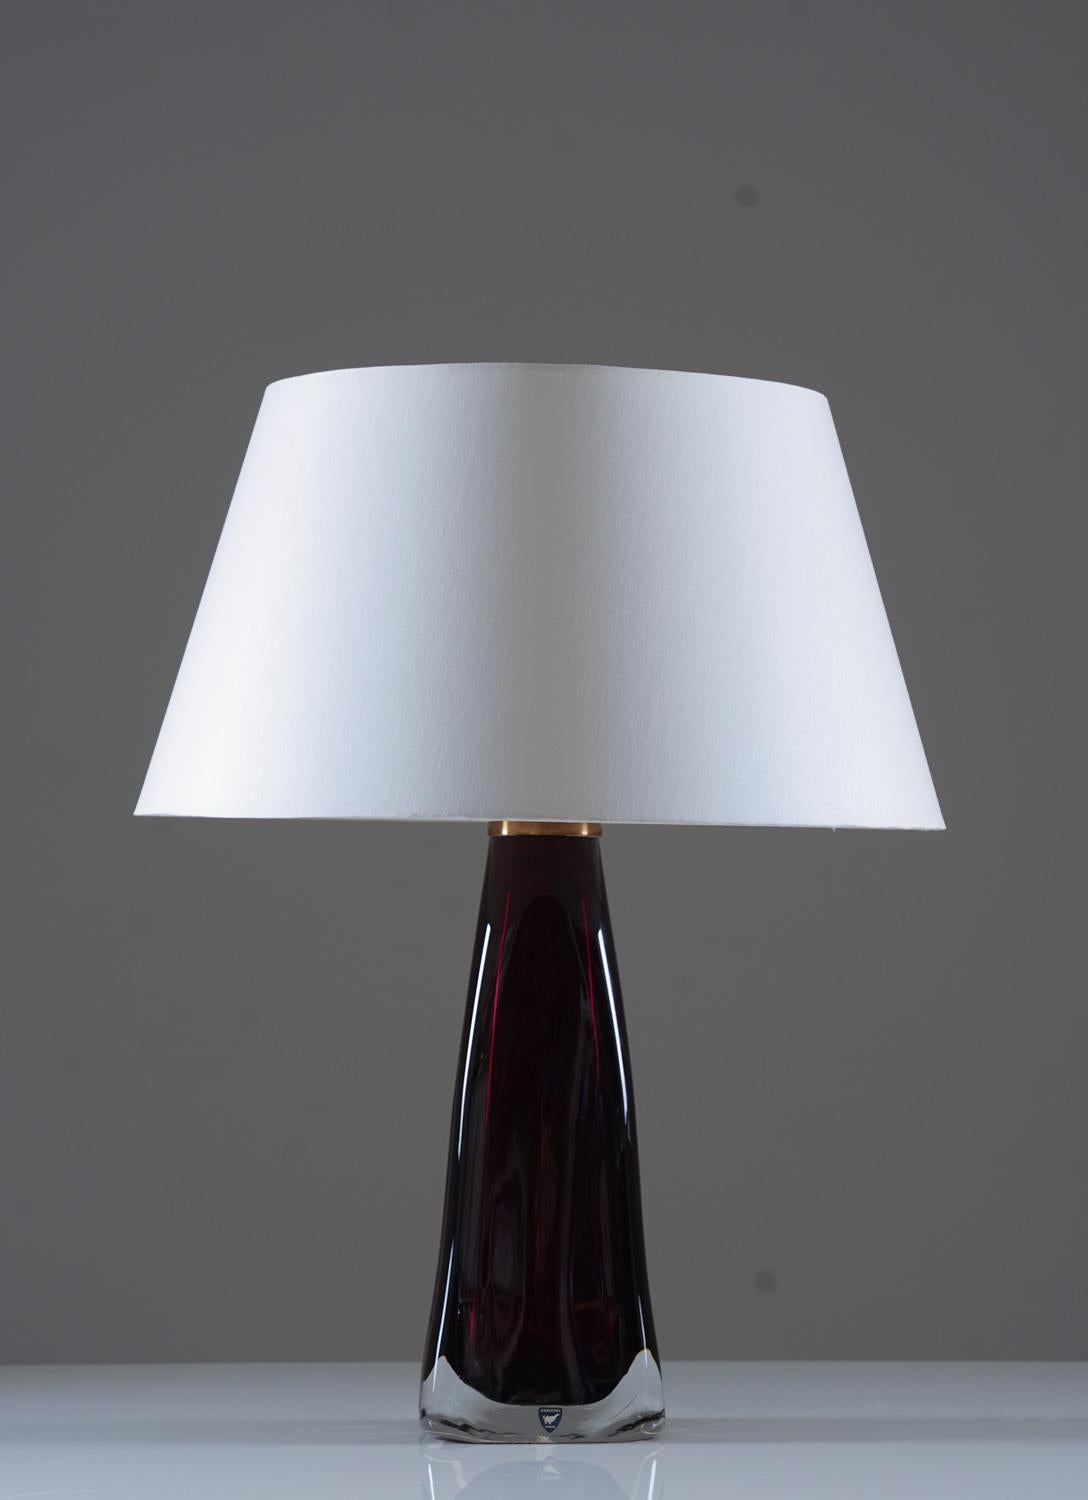 A pair of table lamps in crystal, model RD1323 by Carl Fagerlund for Orrefors, Sweden.
The lamps are rectangular shaped with stunning wine-red color.

Condition: Very good original condition with signs of age.

Height excluding socket: 32